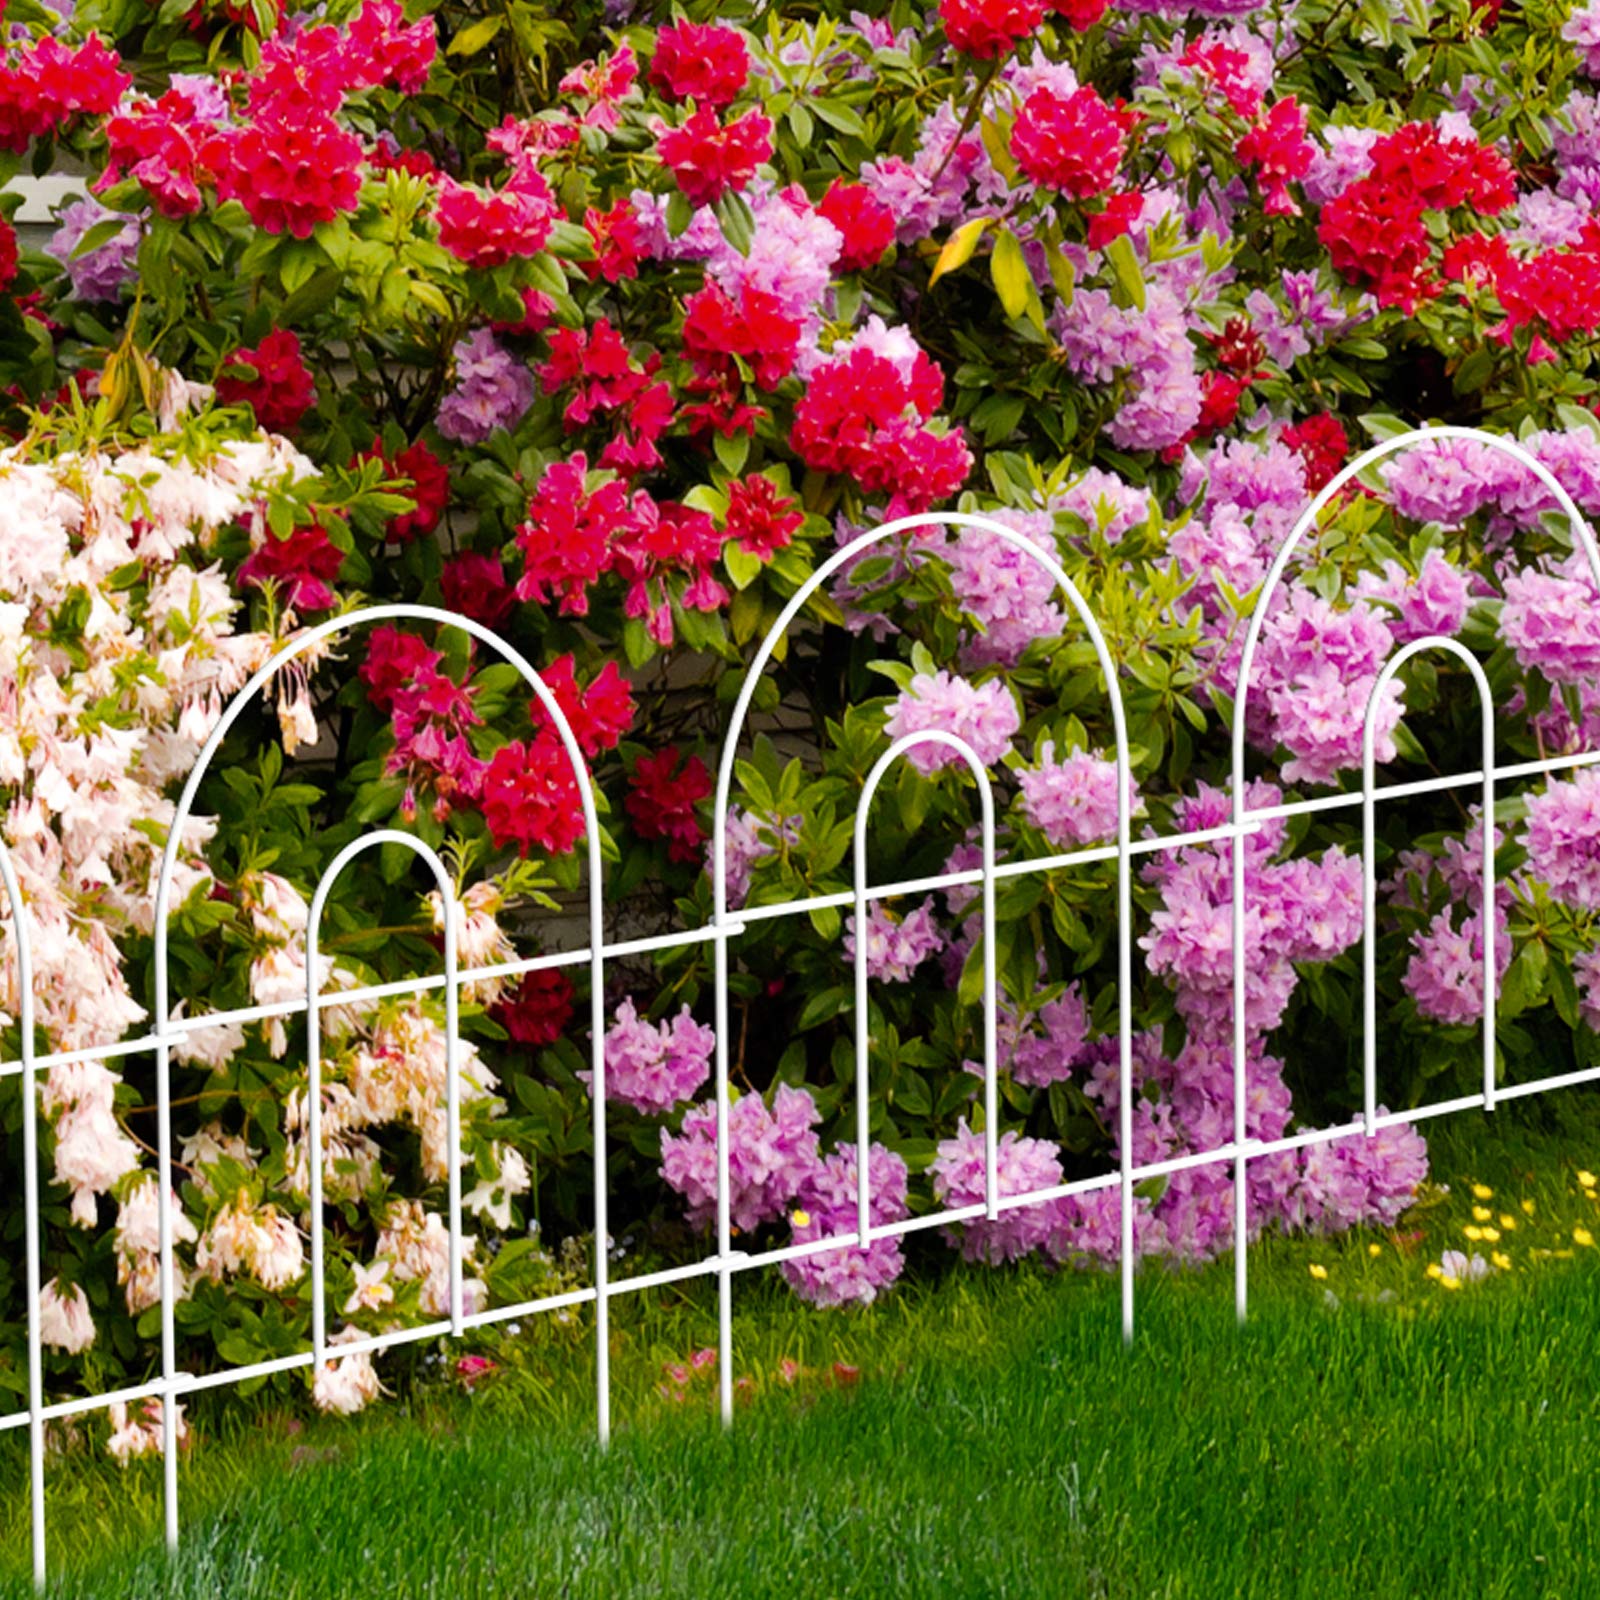 AMAGABELI GARDEN & HOME 35 panels Decorative Garden Fences and Borders for Dogs 18in(H)×50ft(L) No Dig Metal Fence Panel Garden Edging Border Fence For Animal Barrier Fencing for Flower Bed Yard White